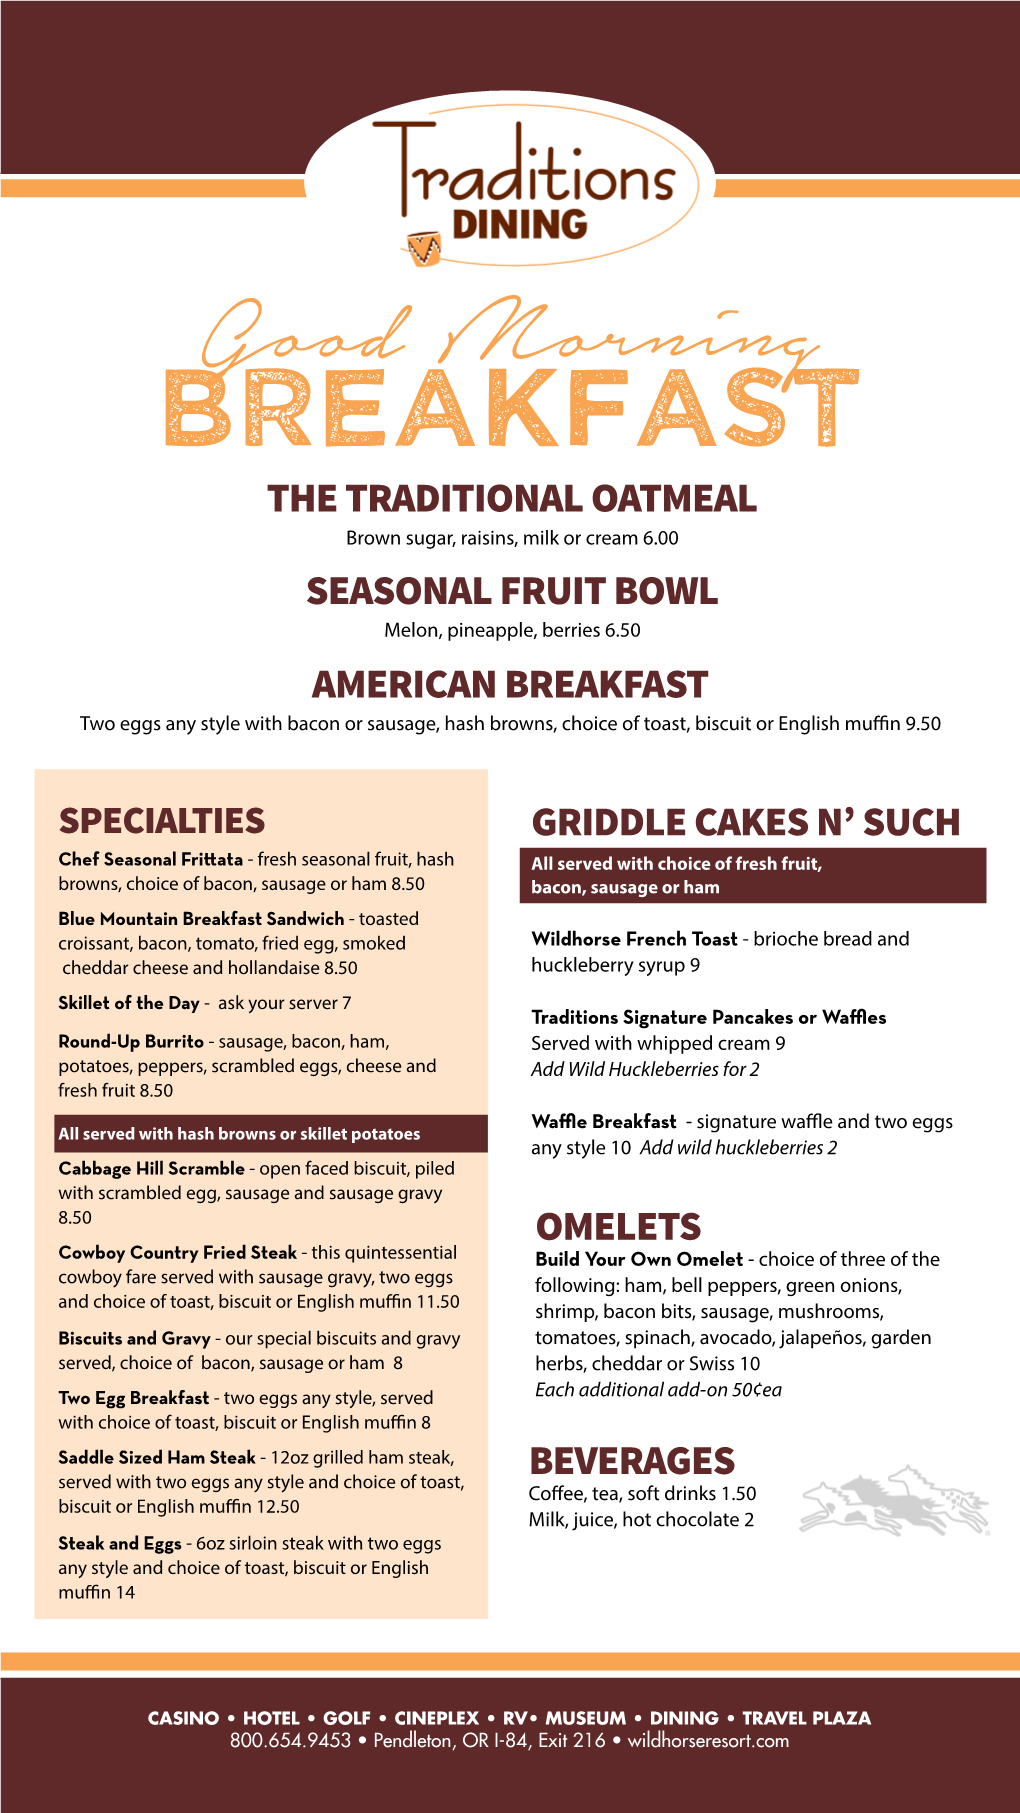 American Breakfast Beverages Griddle Cakes N' Such Omelets the Traditional Oatmeal Seasonal Fruit Bowl